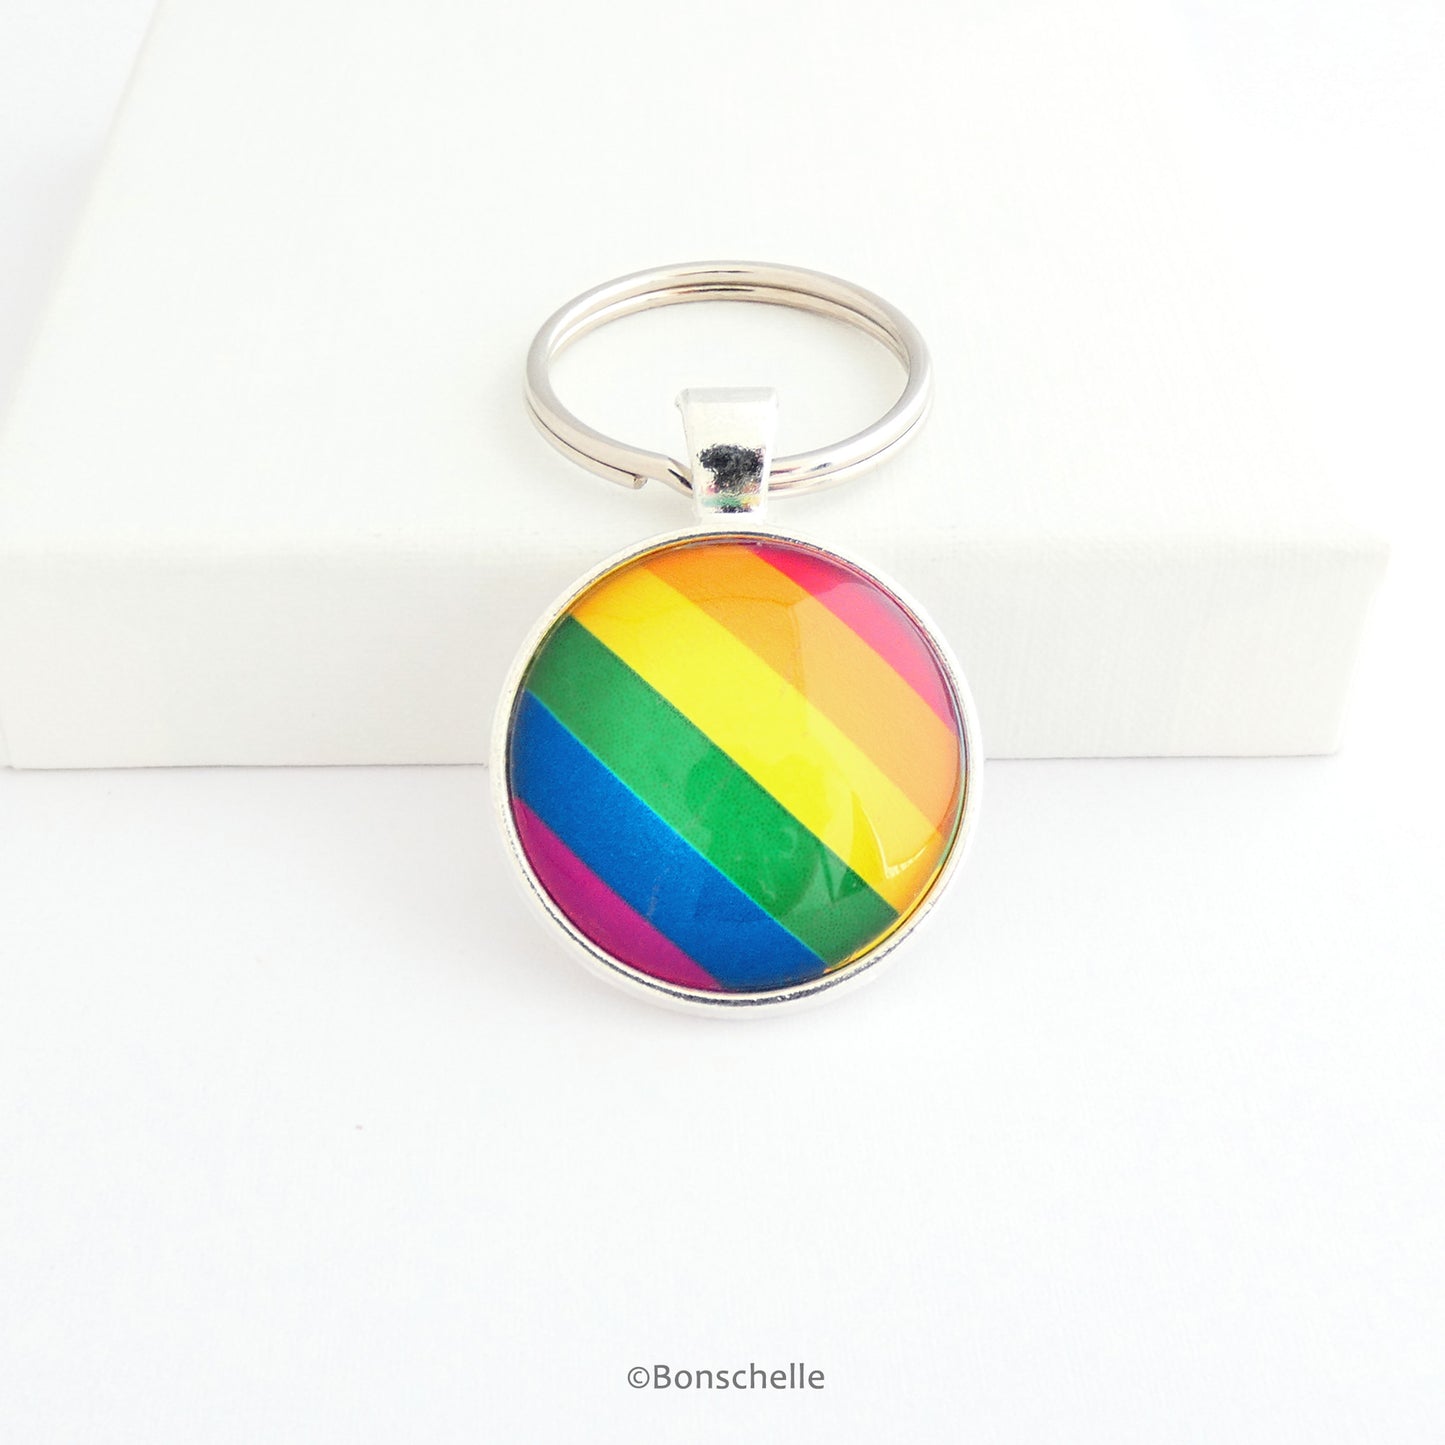 Round shaped silver metal keyrings with a colourful bright rainbow stripe pattern capped with a clear glass cabochon.